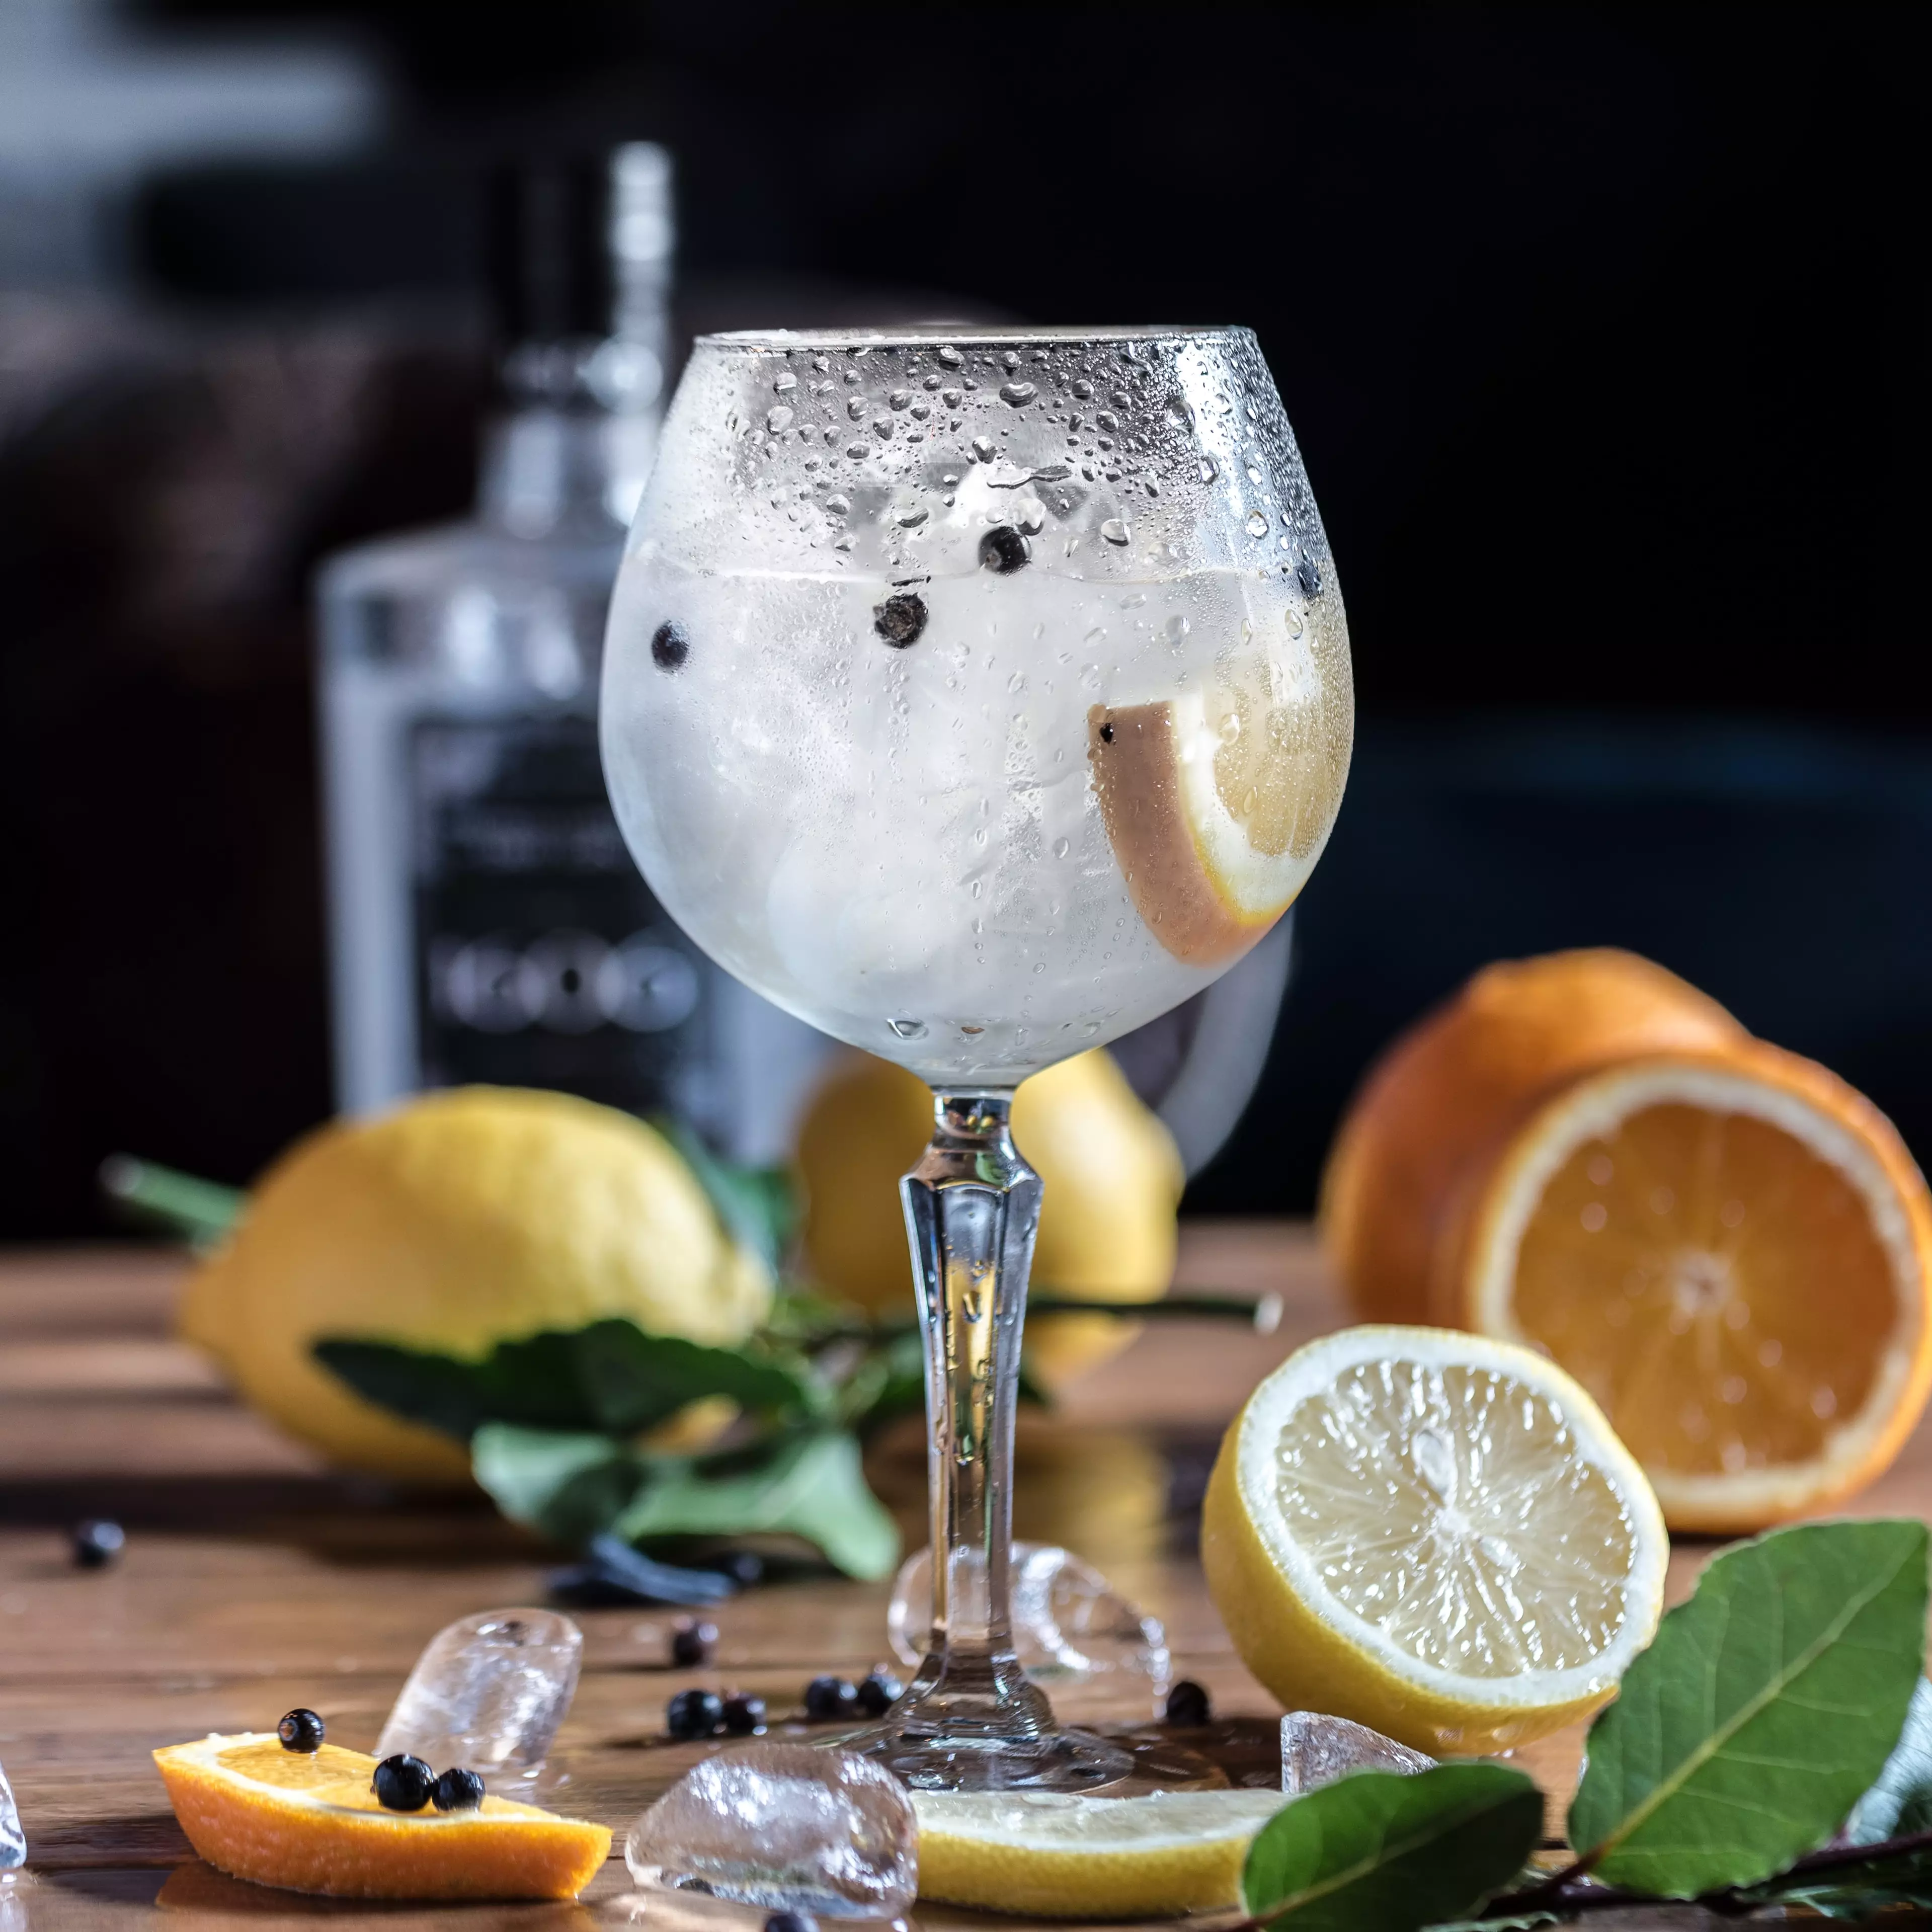 The bev has put a fresh spin on gin (